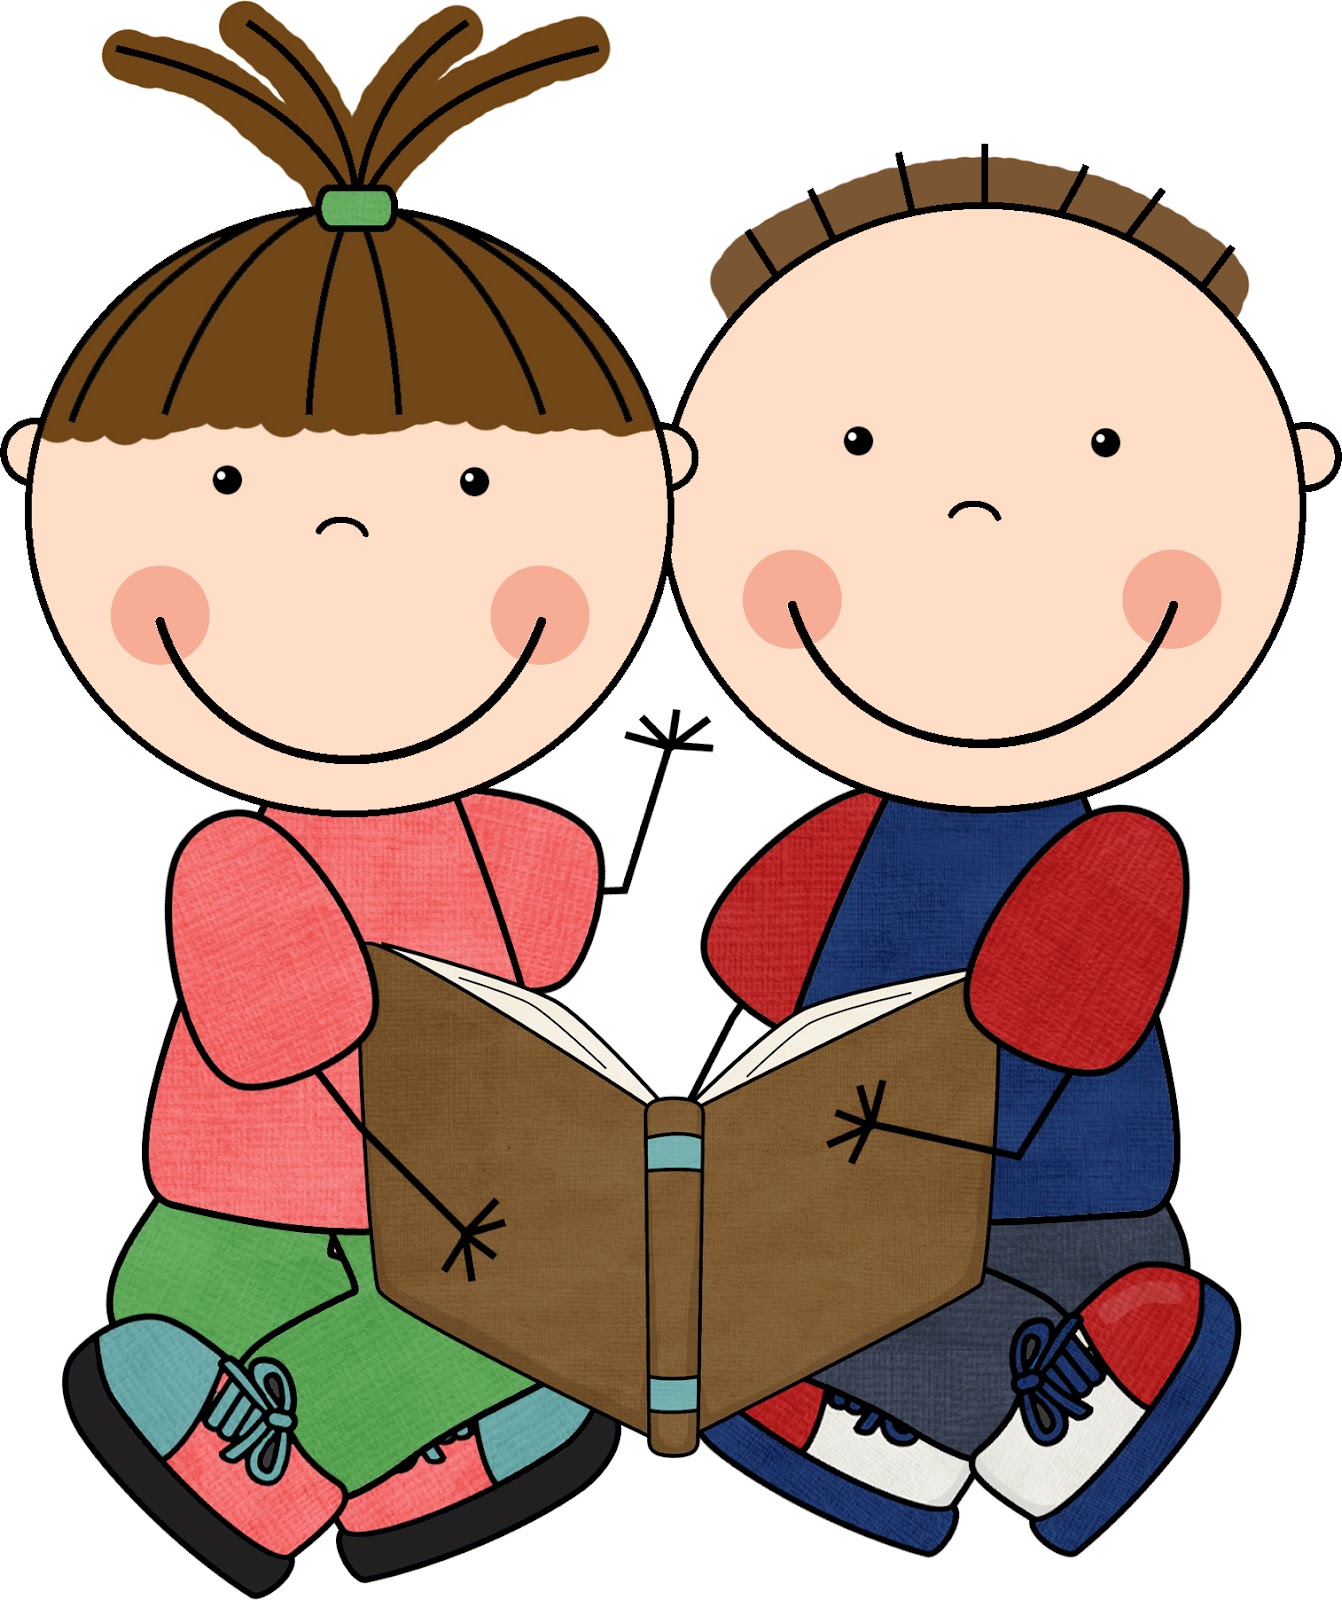 Help Others Clipart - ClipArt Best